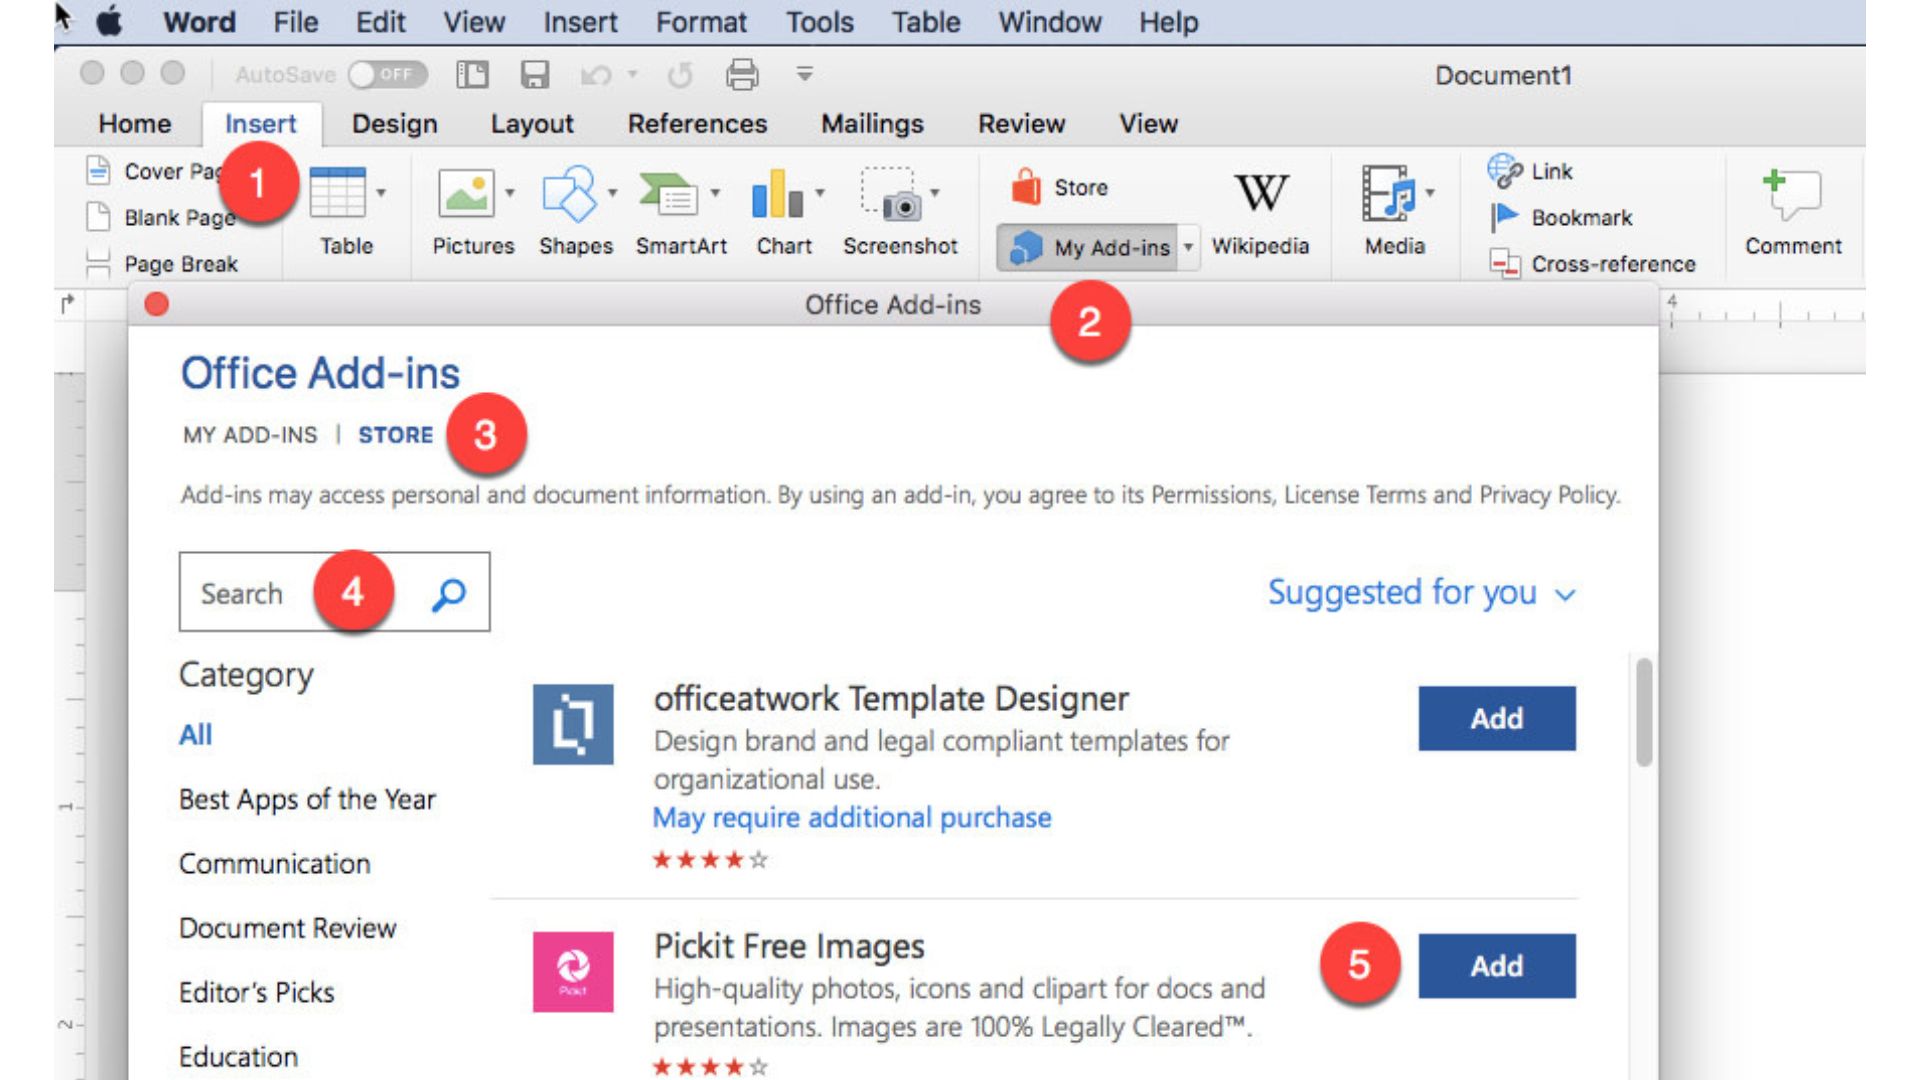 Add Contacts: Microsoft Office Outlook Add-In Review